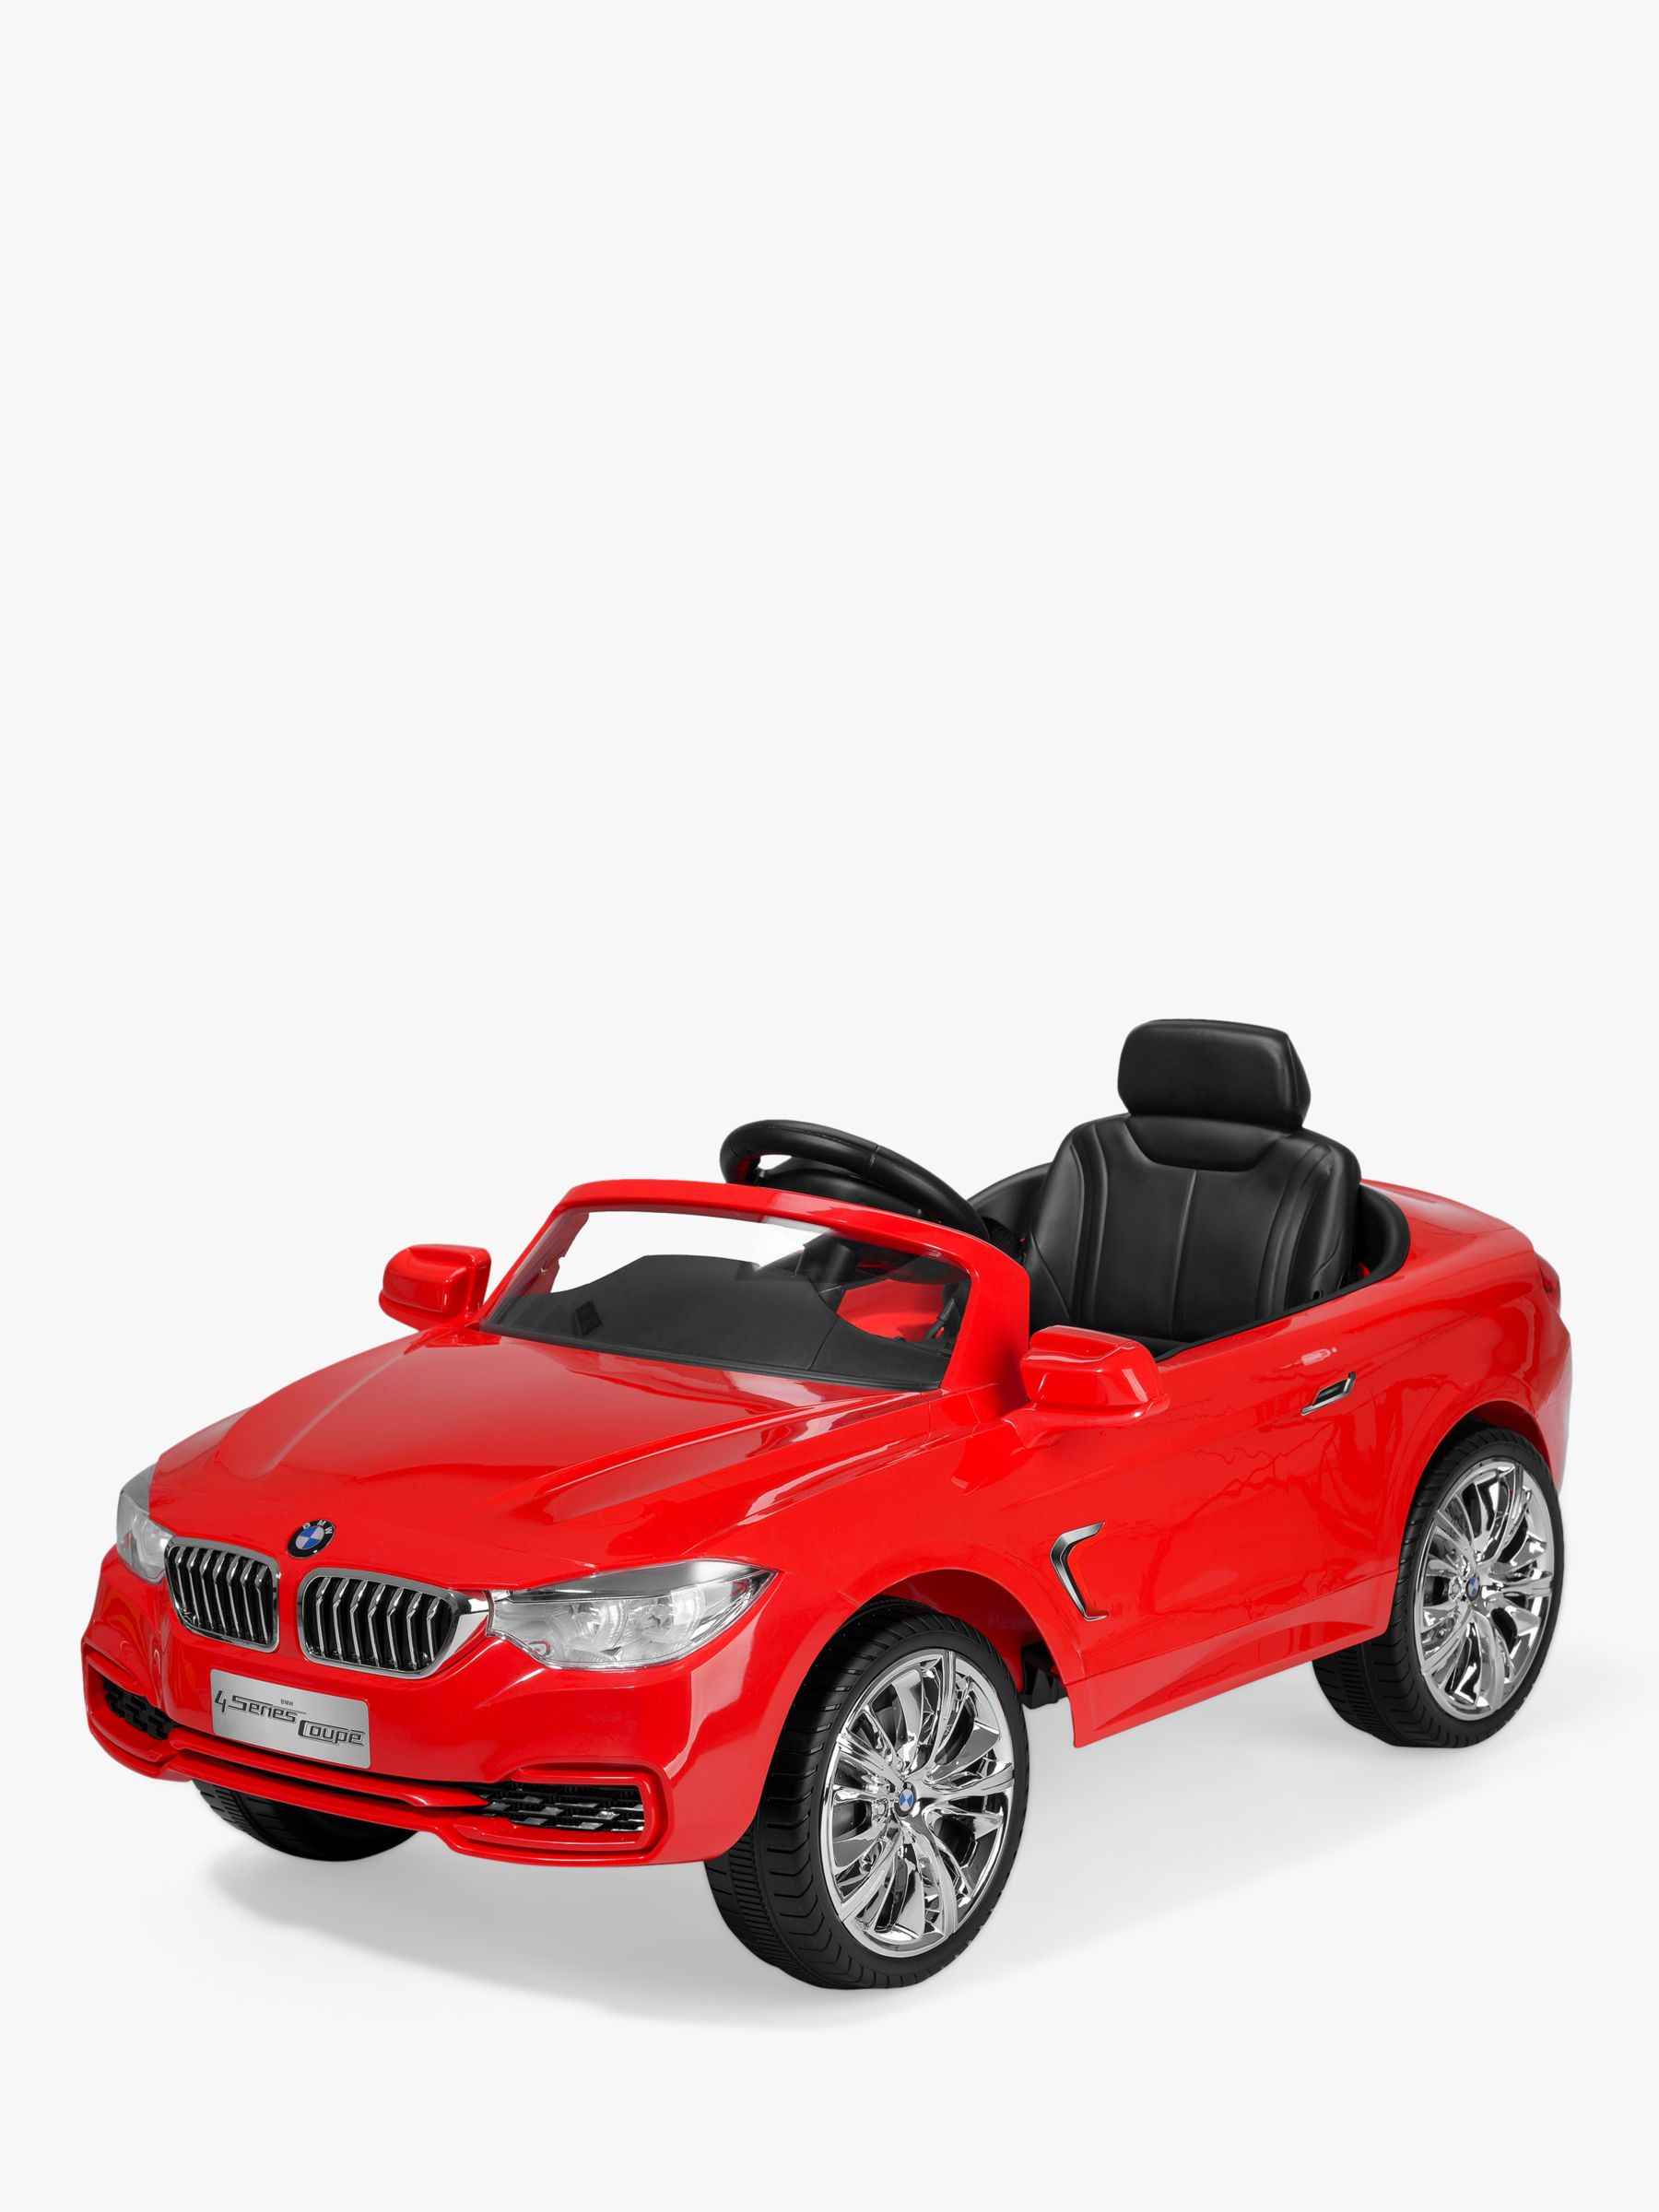 where to buy toy cars